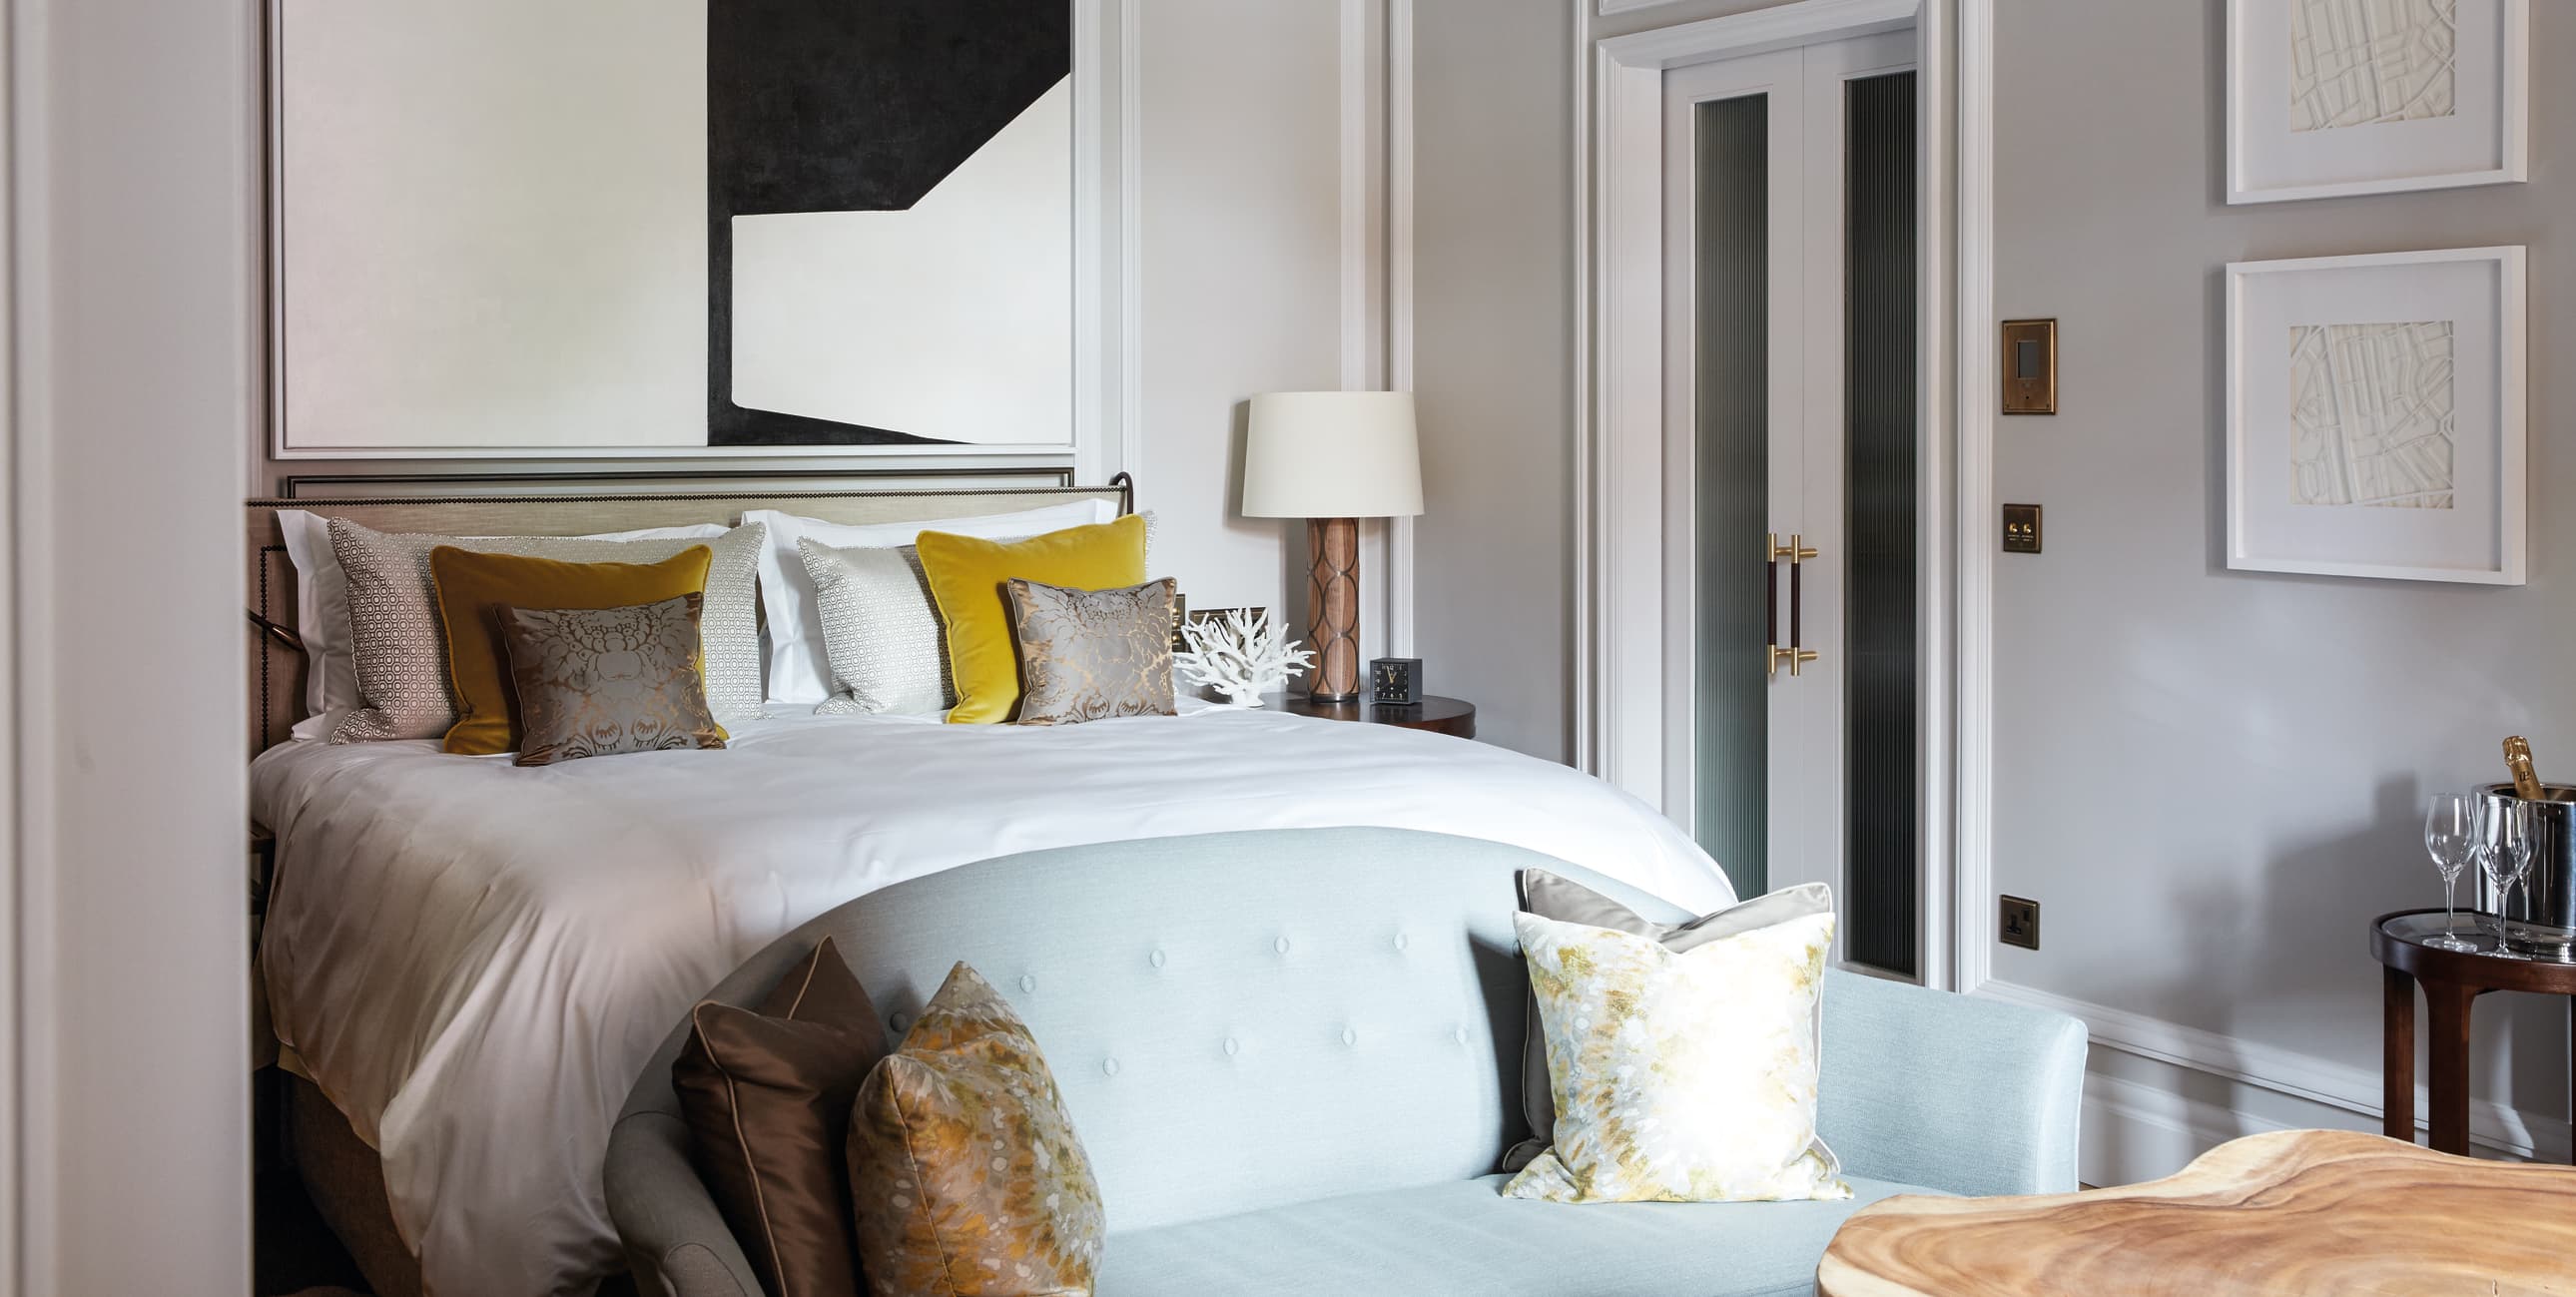 The Cadogan, A Belmond Hotel, London Rooms: Pictures & Reviews